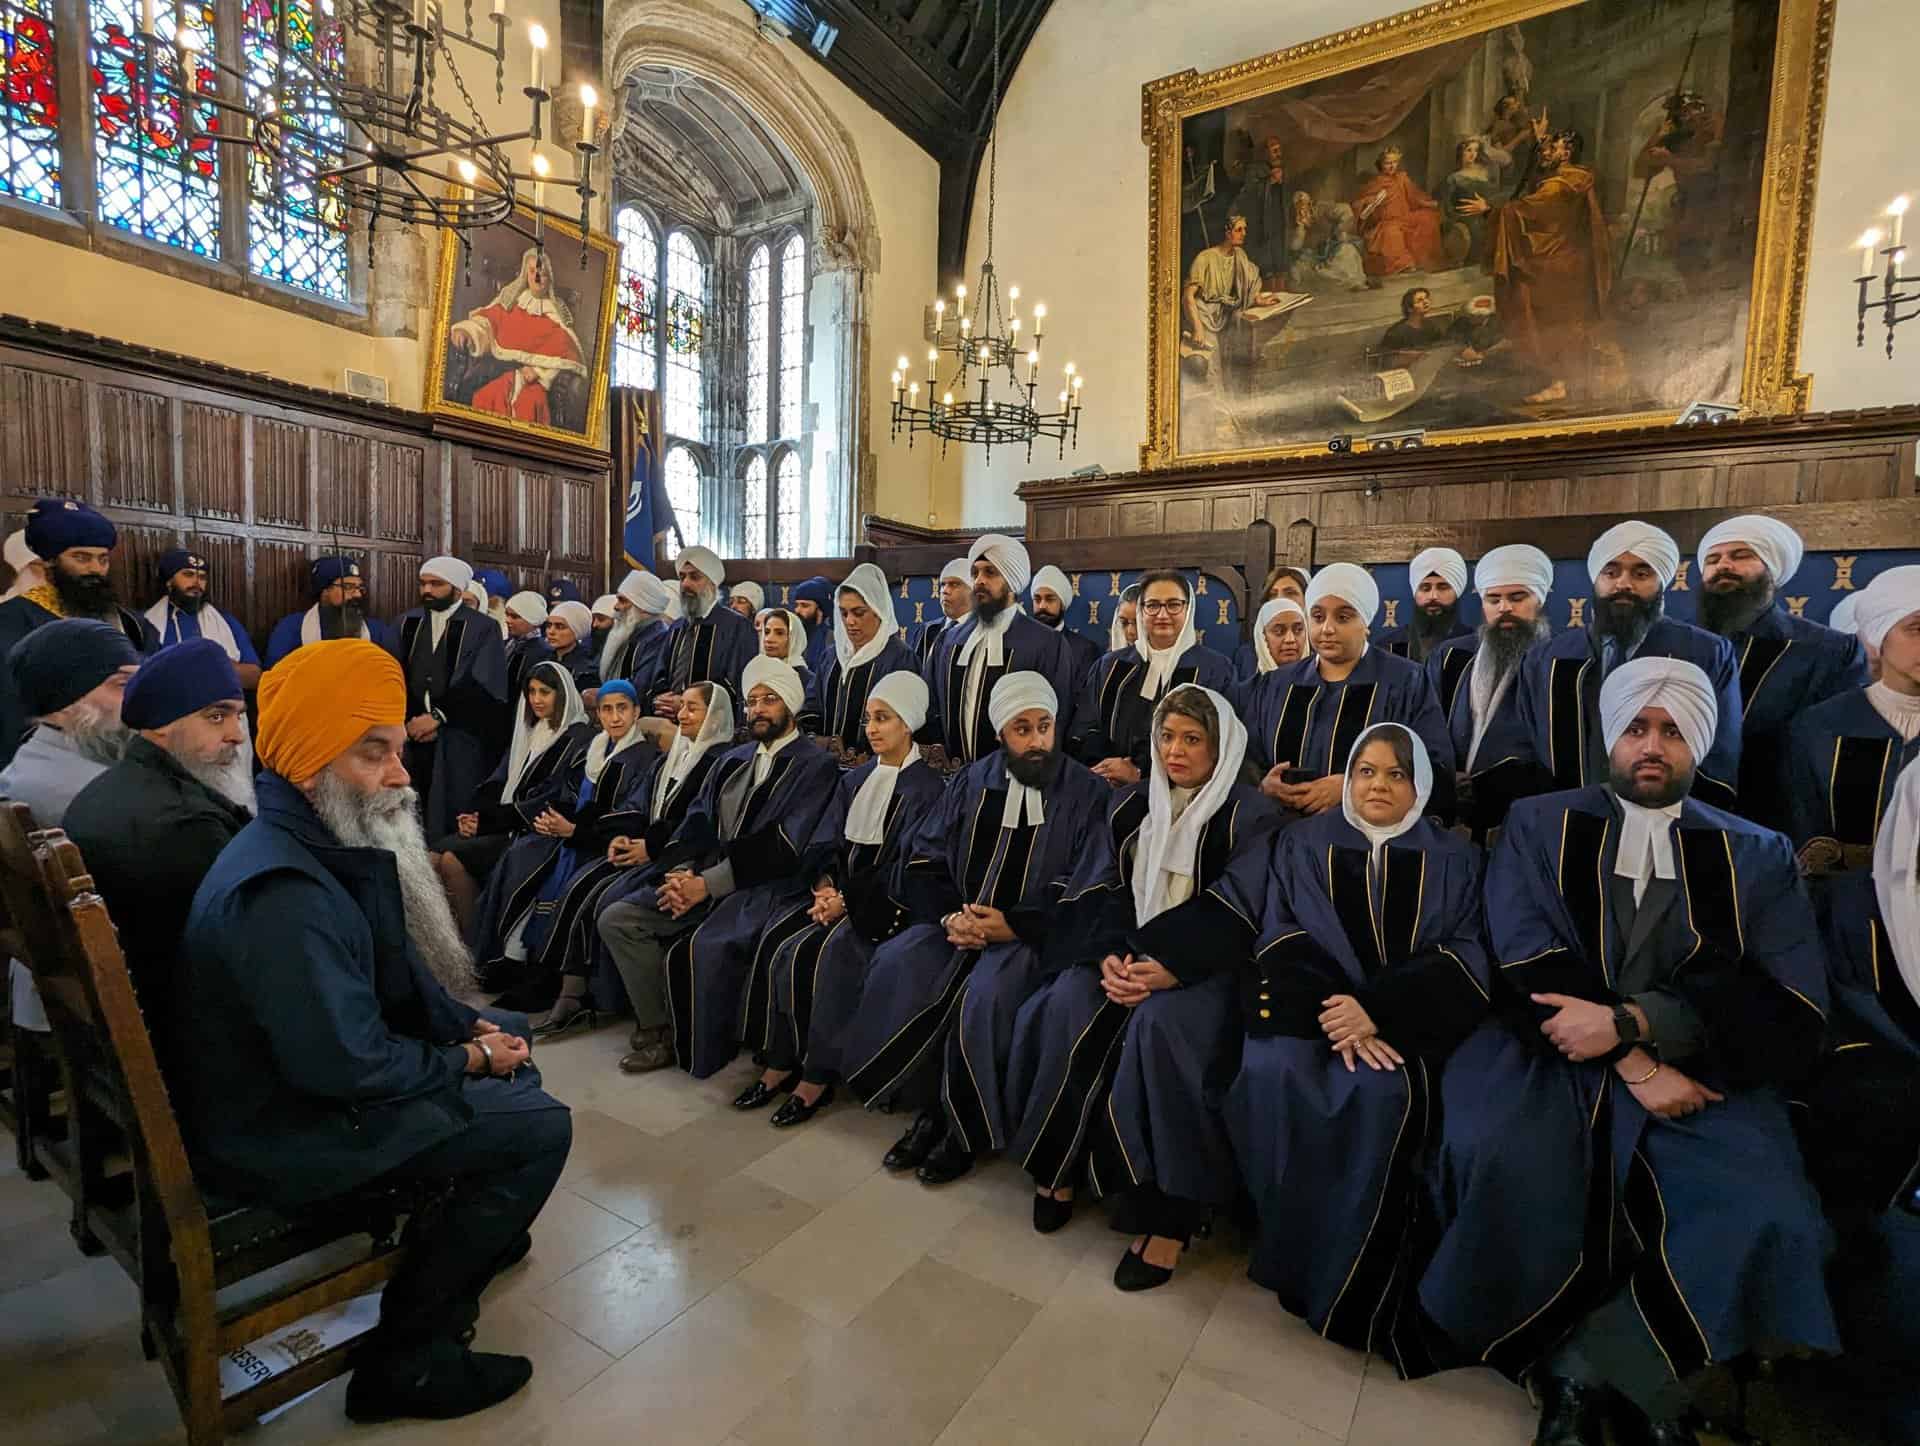 The world’s first Sikh court opens in London – Religion Media Centre